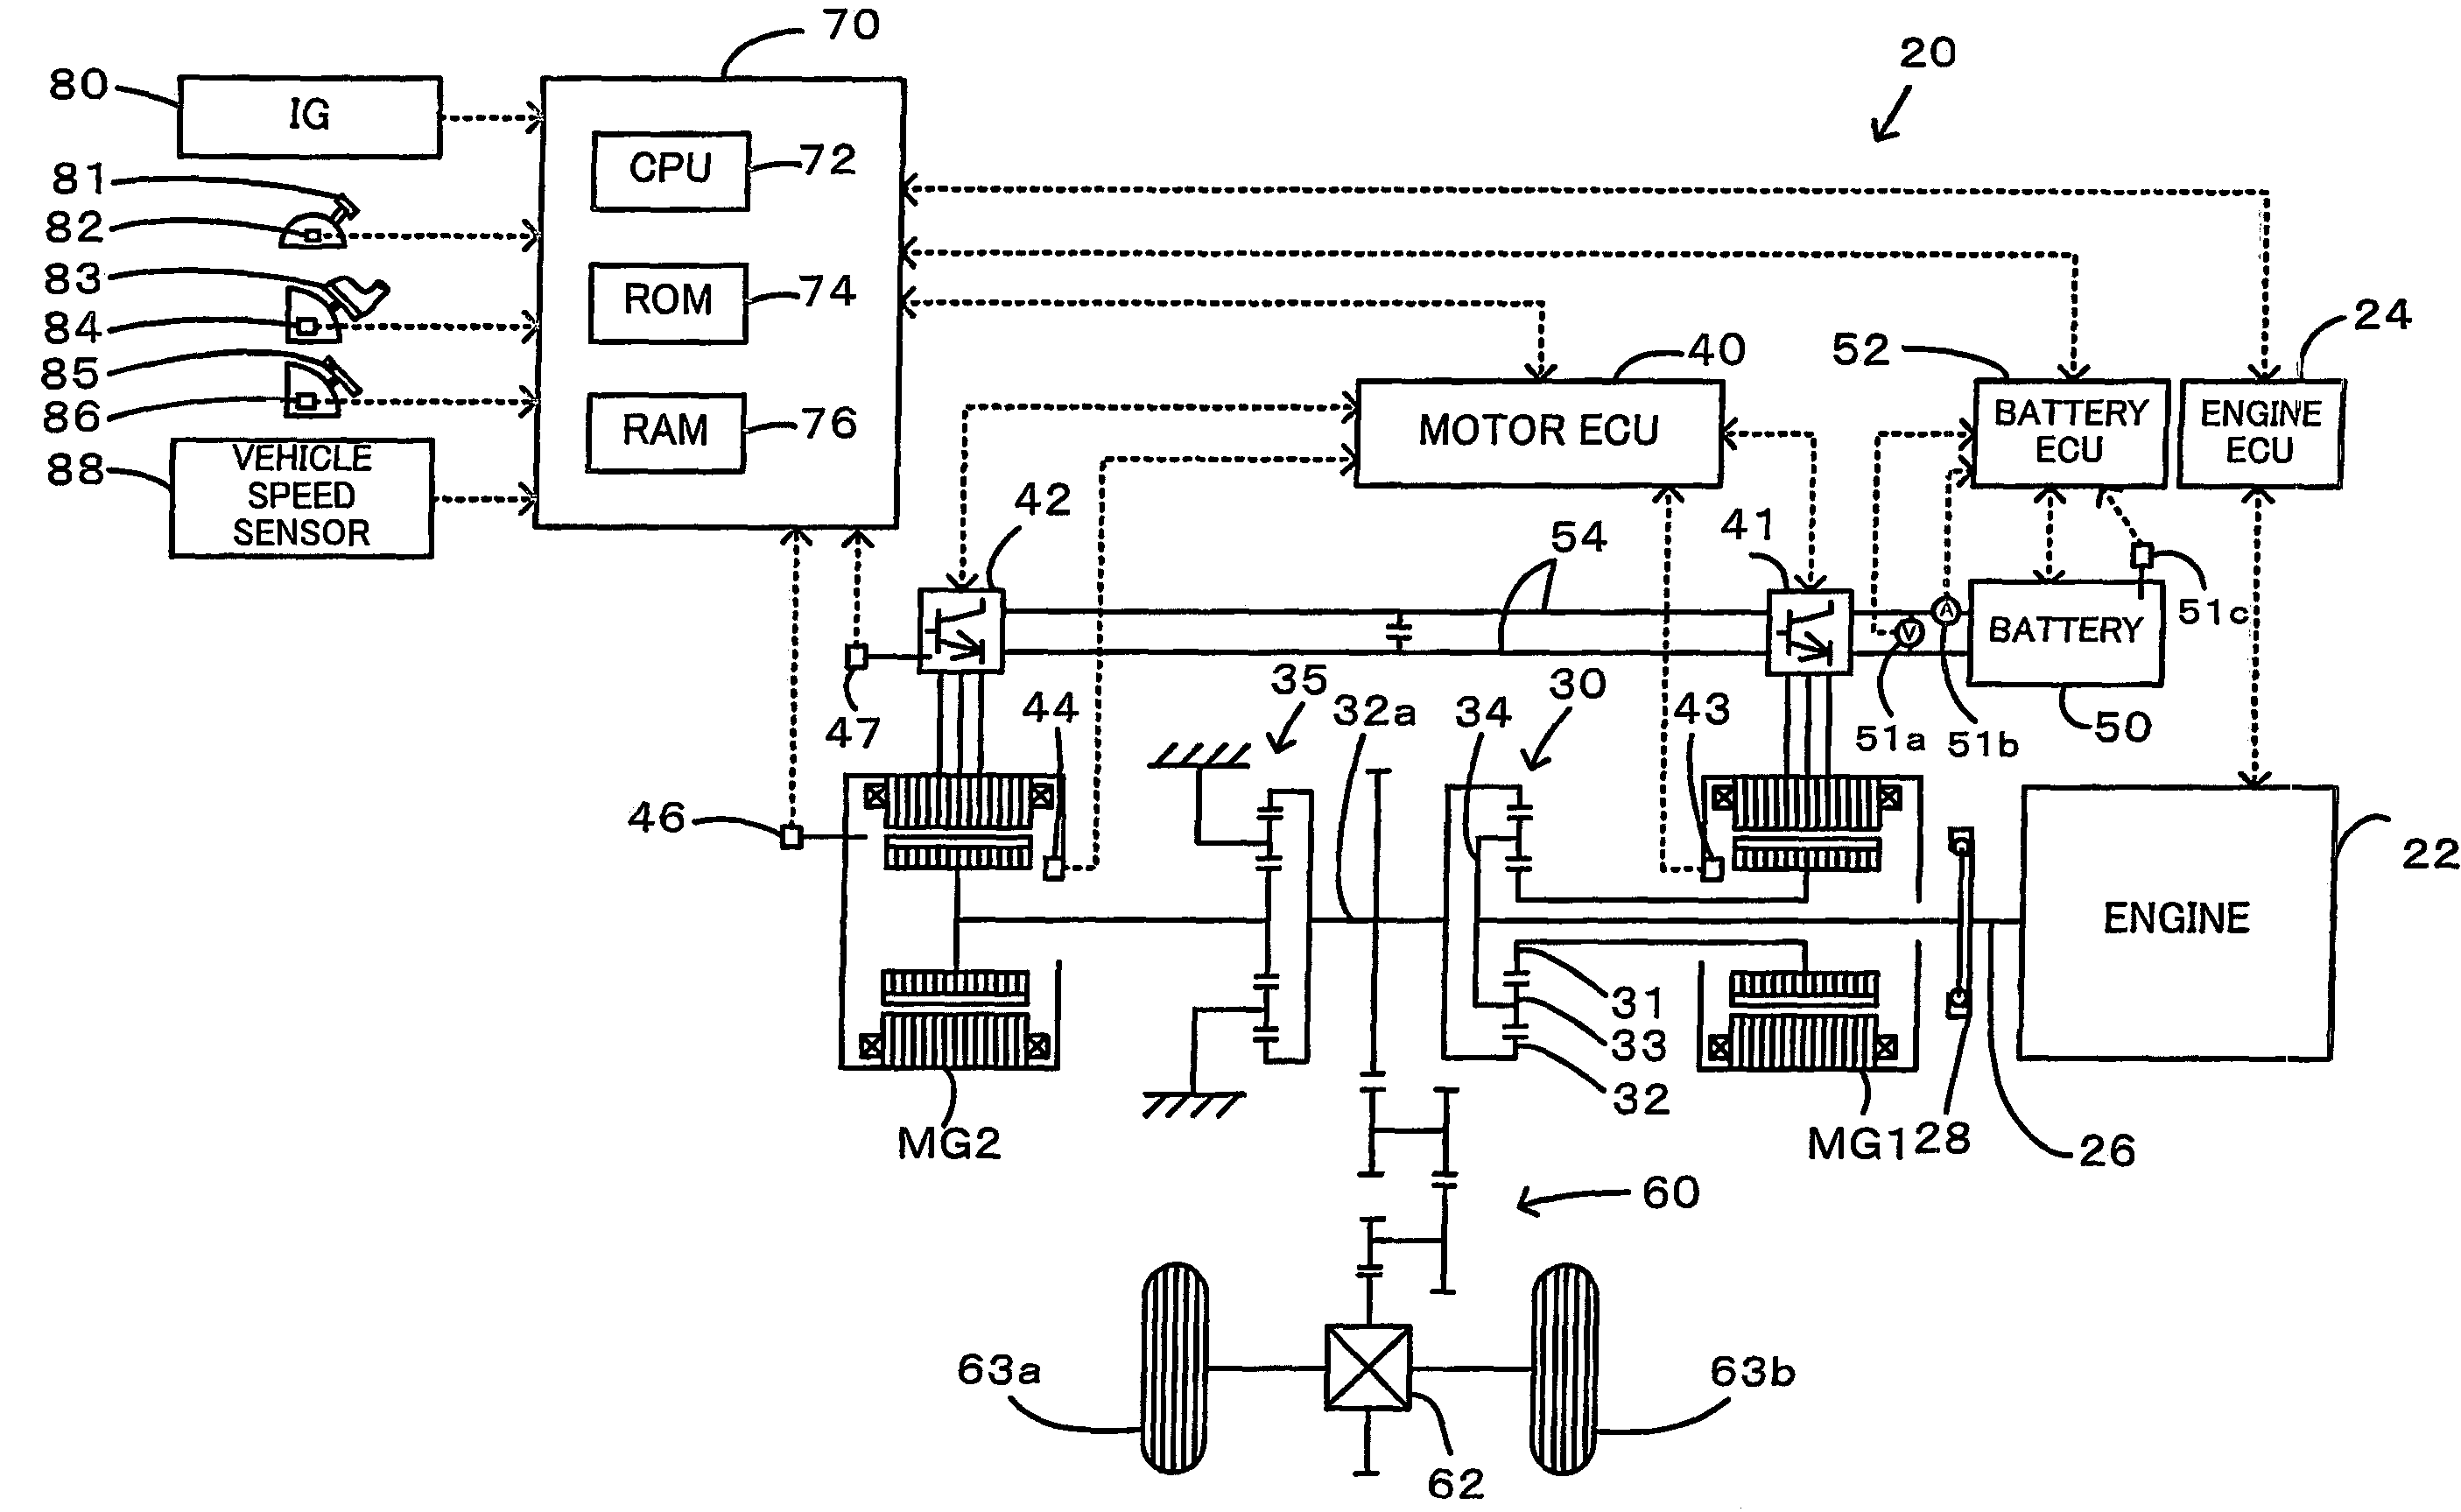 Power output apparatus for hybrid vehicle